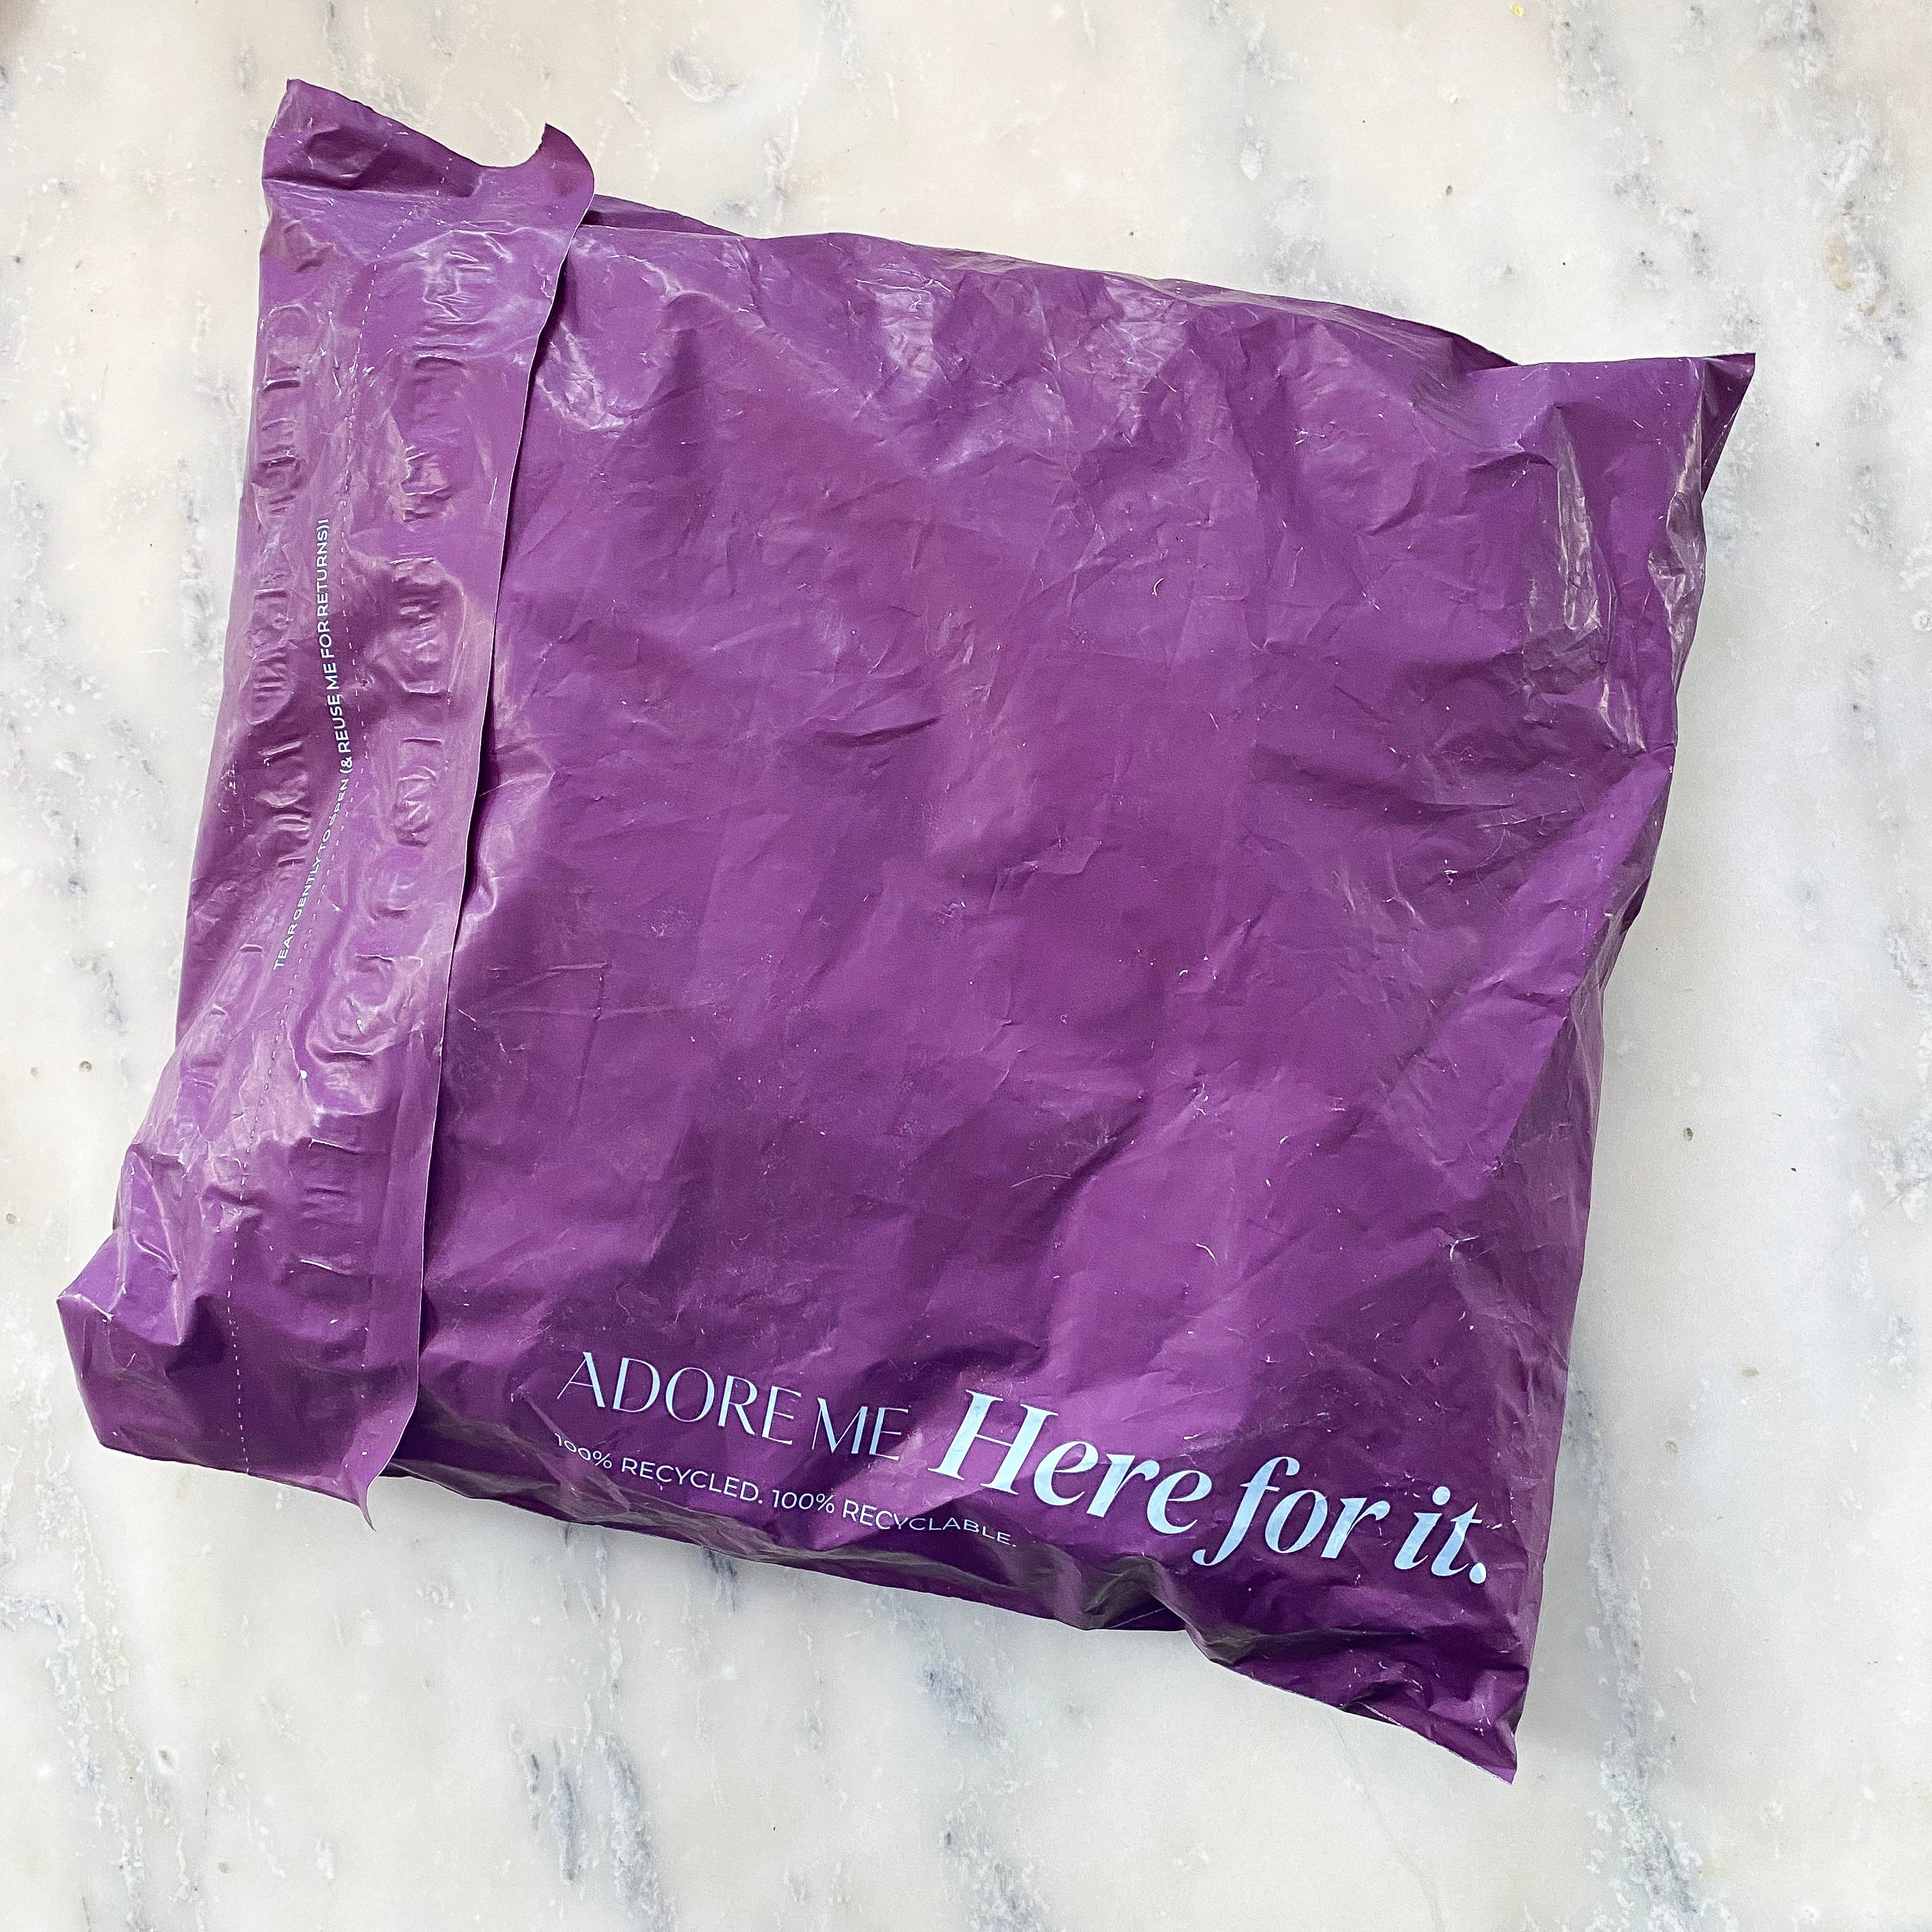 Adore Me March 2021 Collection Reveal + Coupon! - Hello Subscription